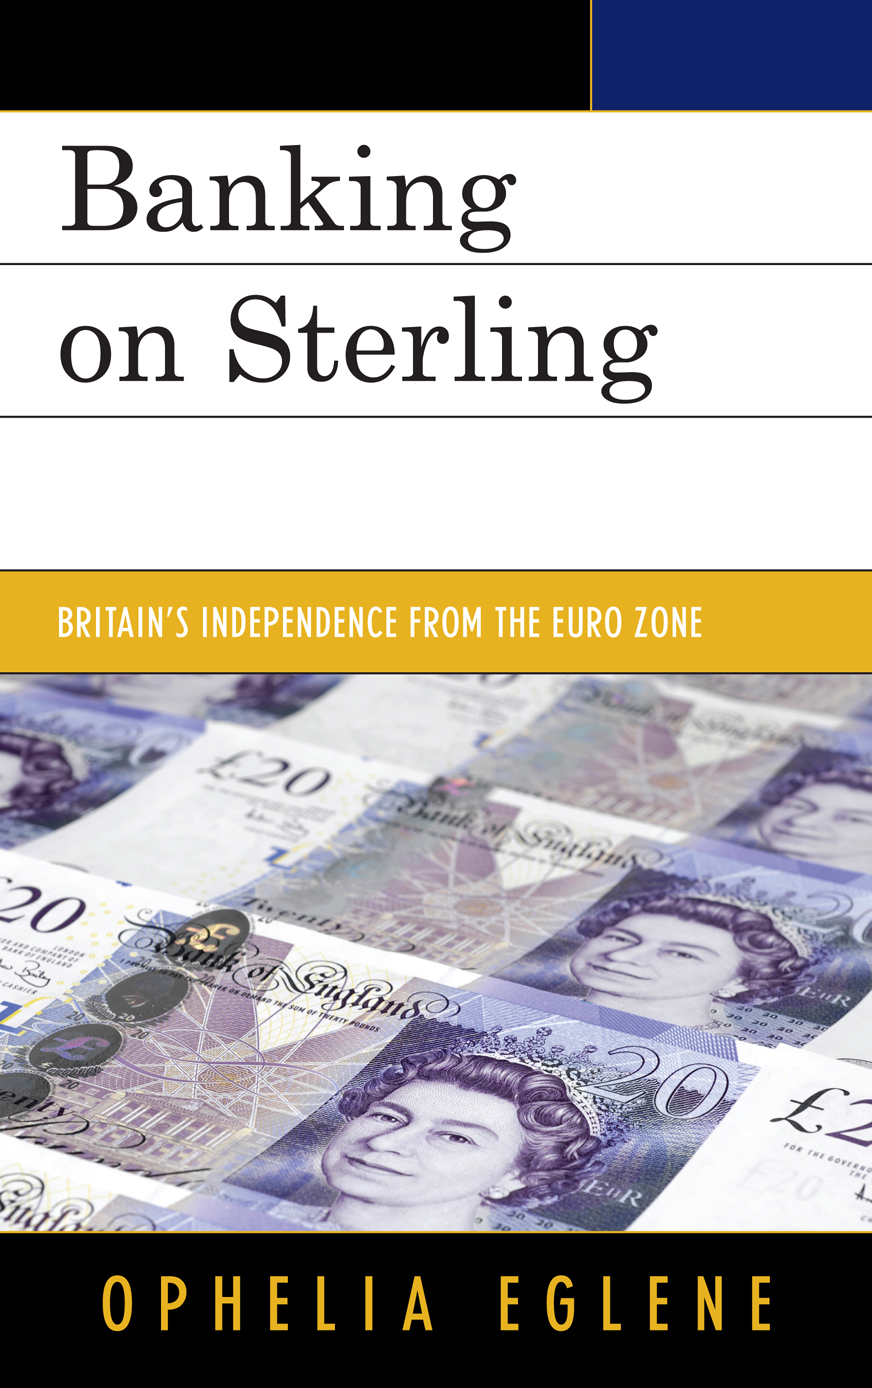 Banking on Sterling: Britain's Independence from the Euro Zone